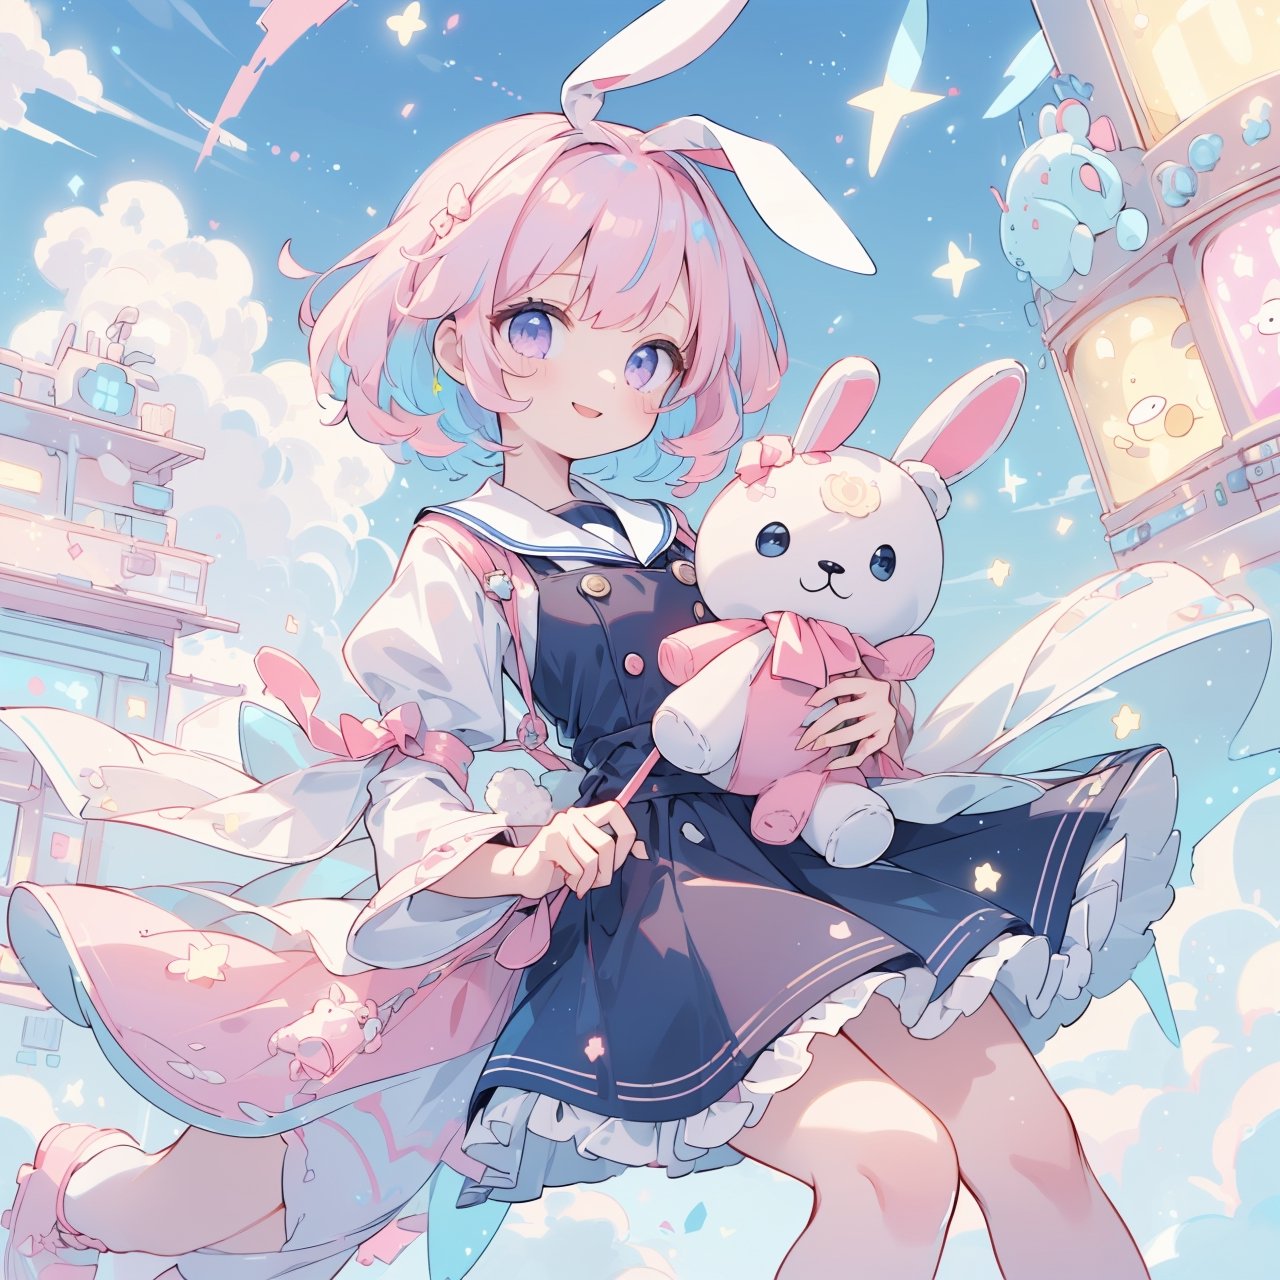 (masterpiece, best quality, highres:1.3), ultra resolution image, (1girl), ((solo), smile, happy, soft toy, teddy bear, bunny doll, clouds, claw machine, claw machine, pink, blue, fantasy,  ((Navy_blue_hair)),  short_hair, purple_eyes